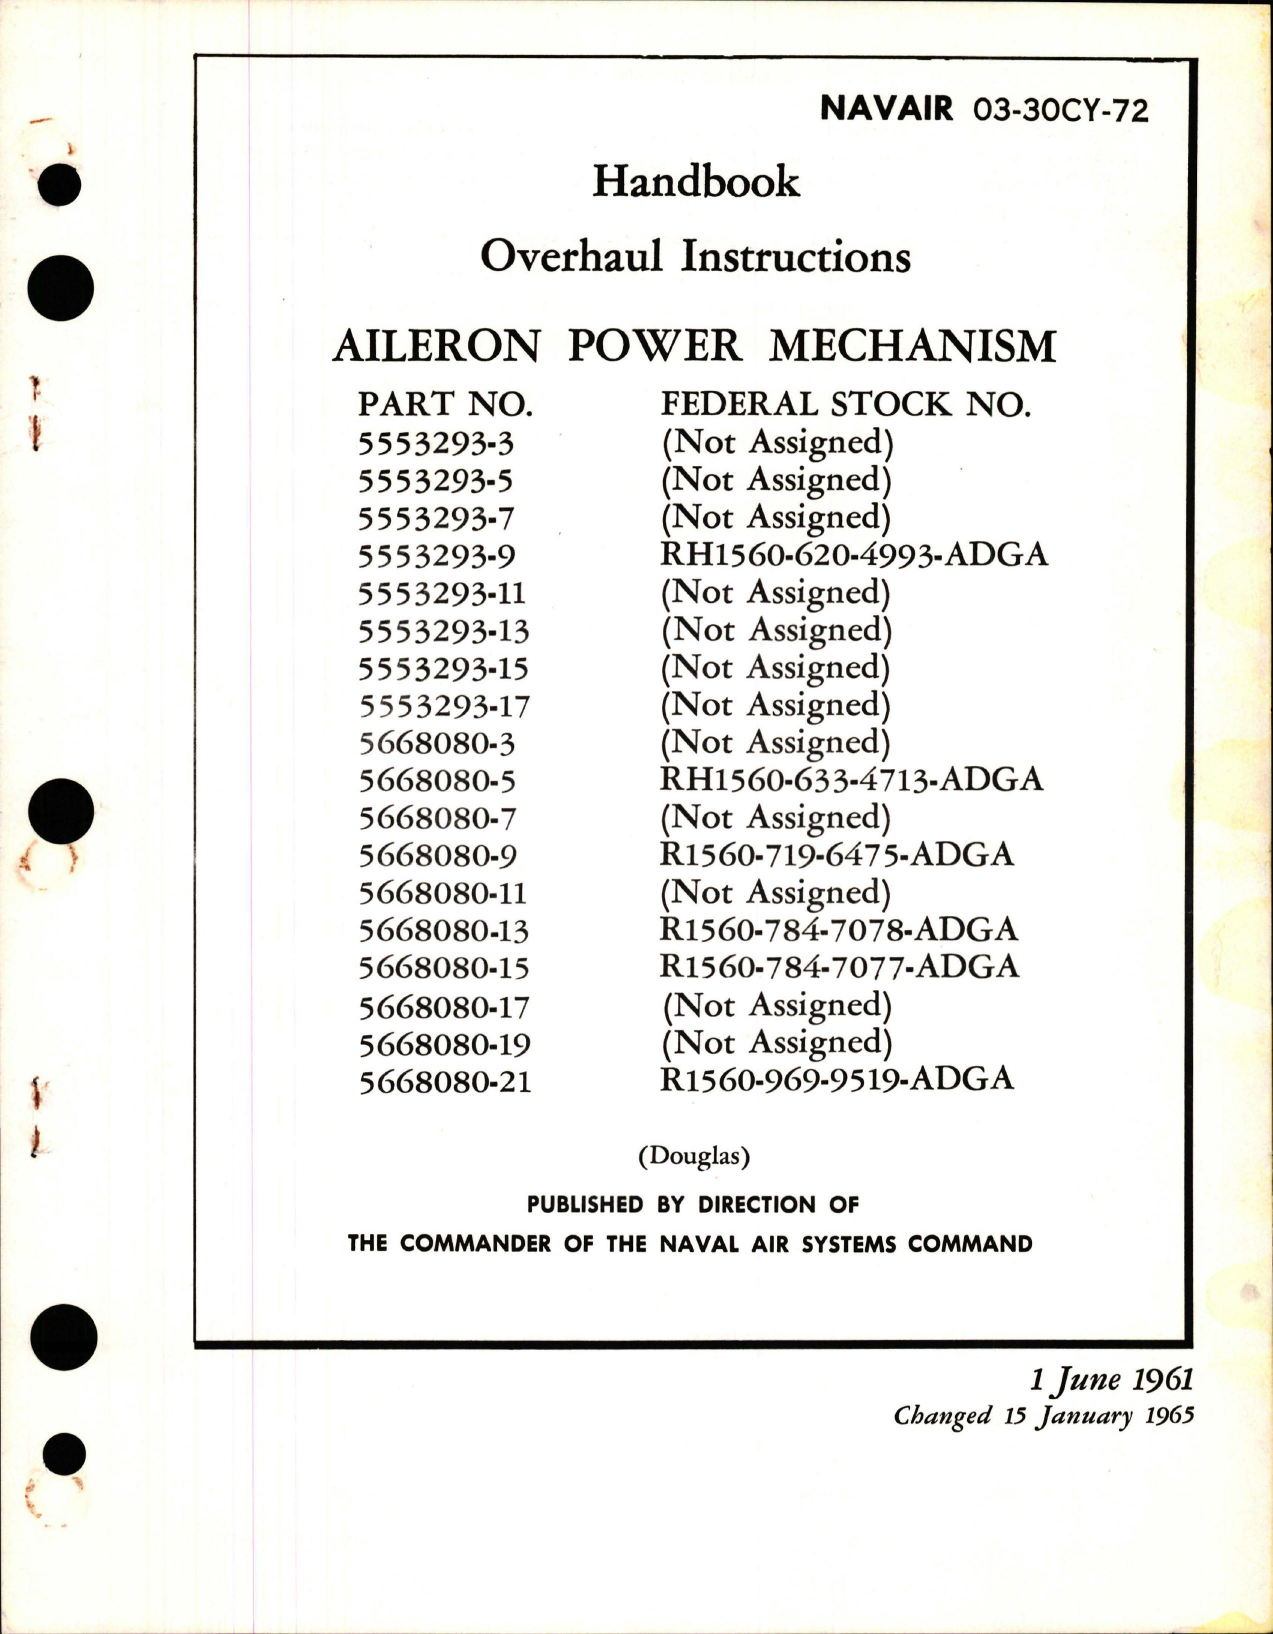 Sample page 1 from AirCorps Library document: Overhaul Instructions for Aileron Power Mechanism 